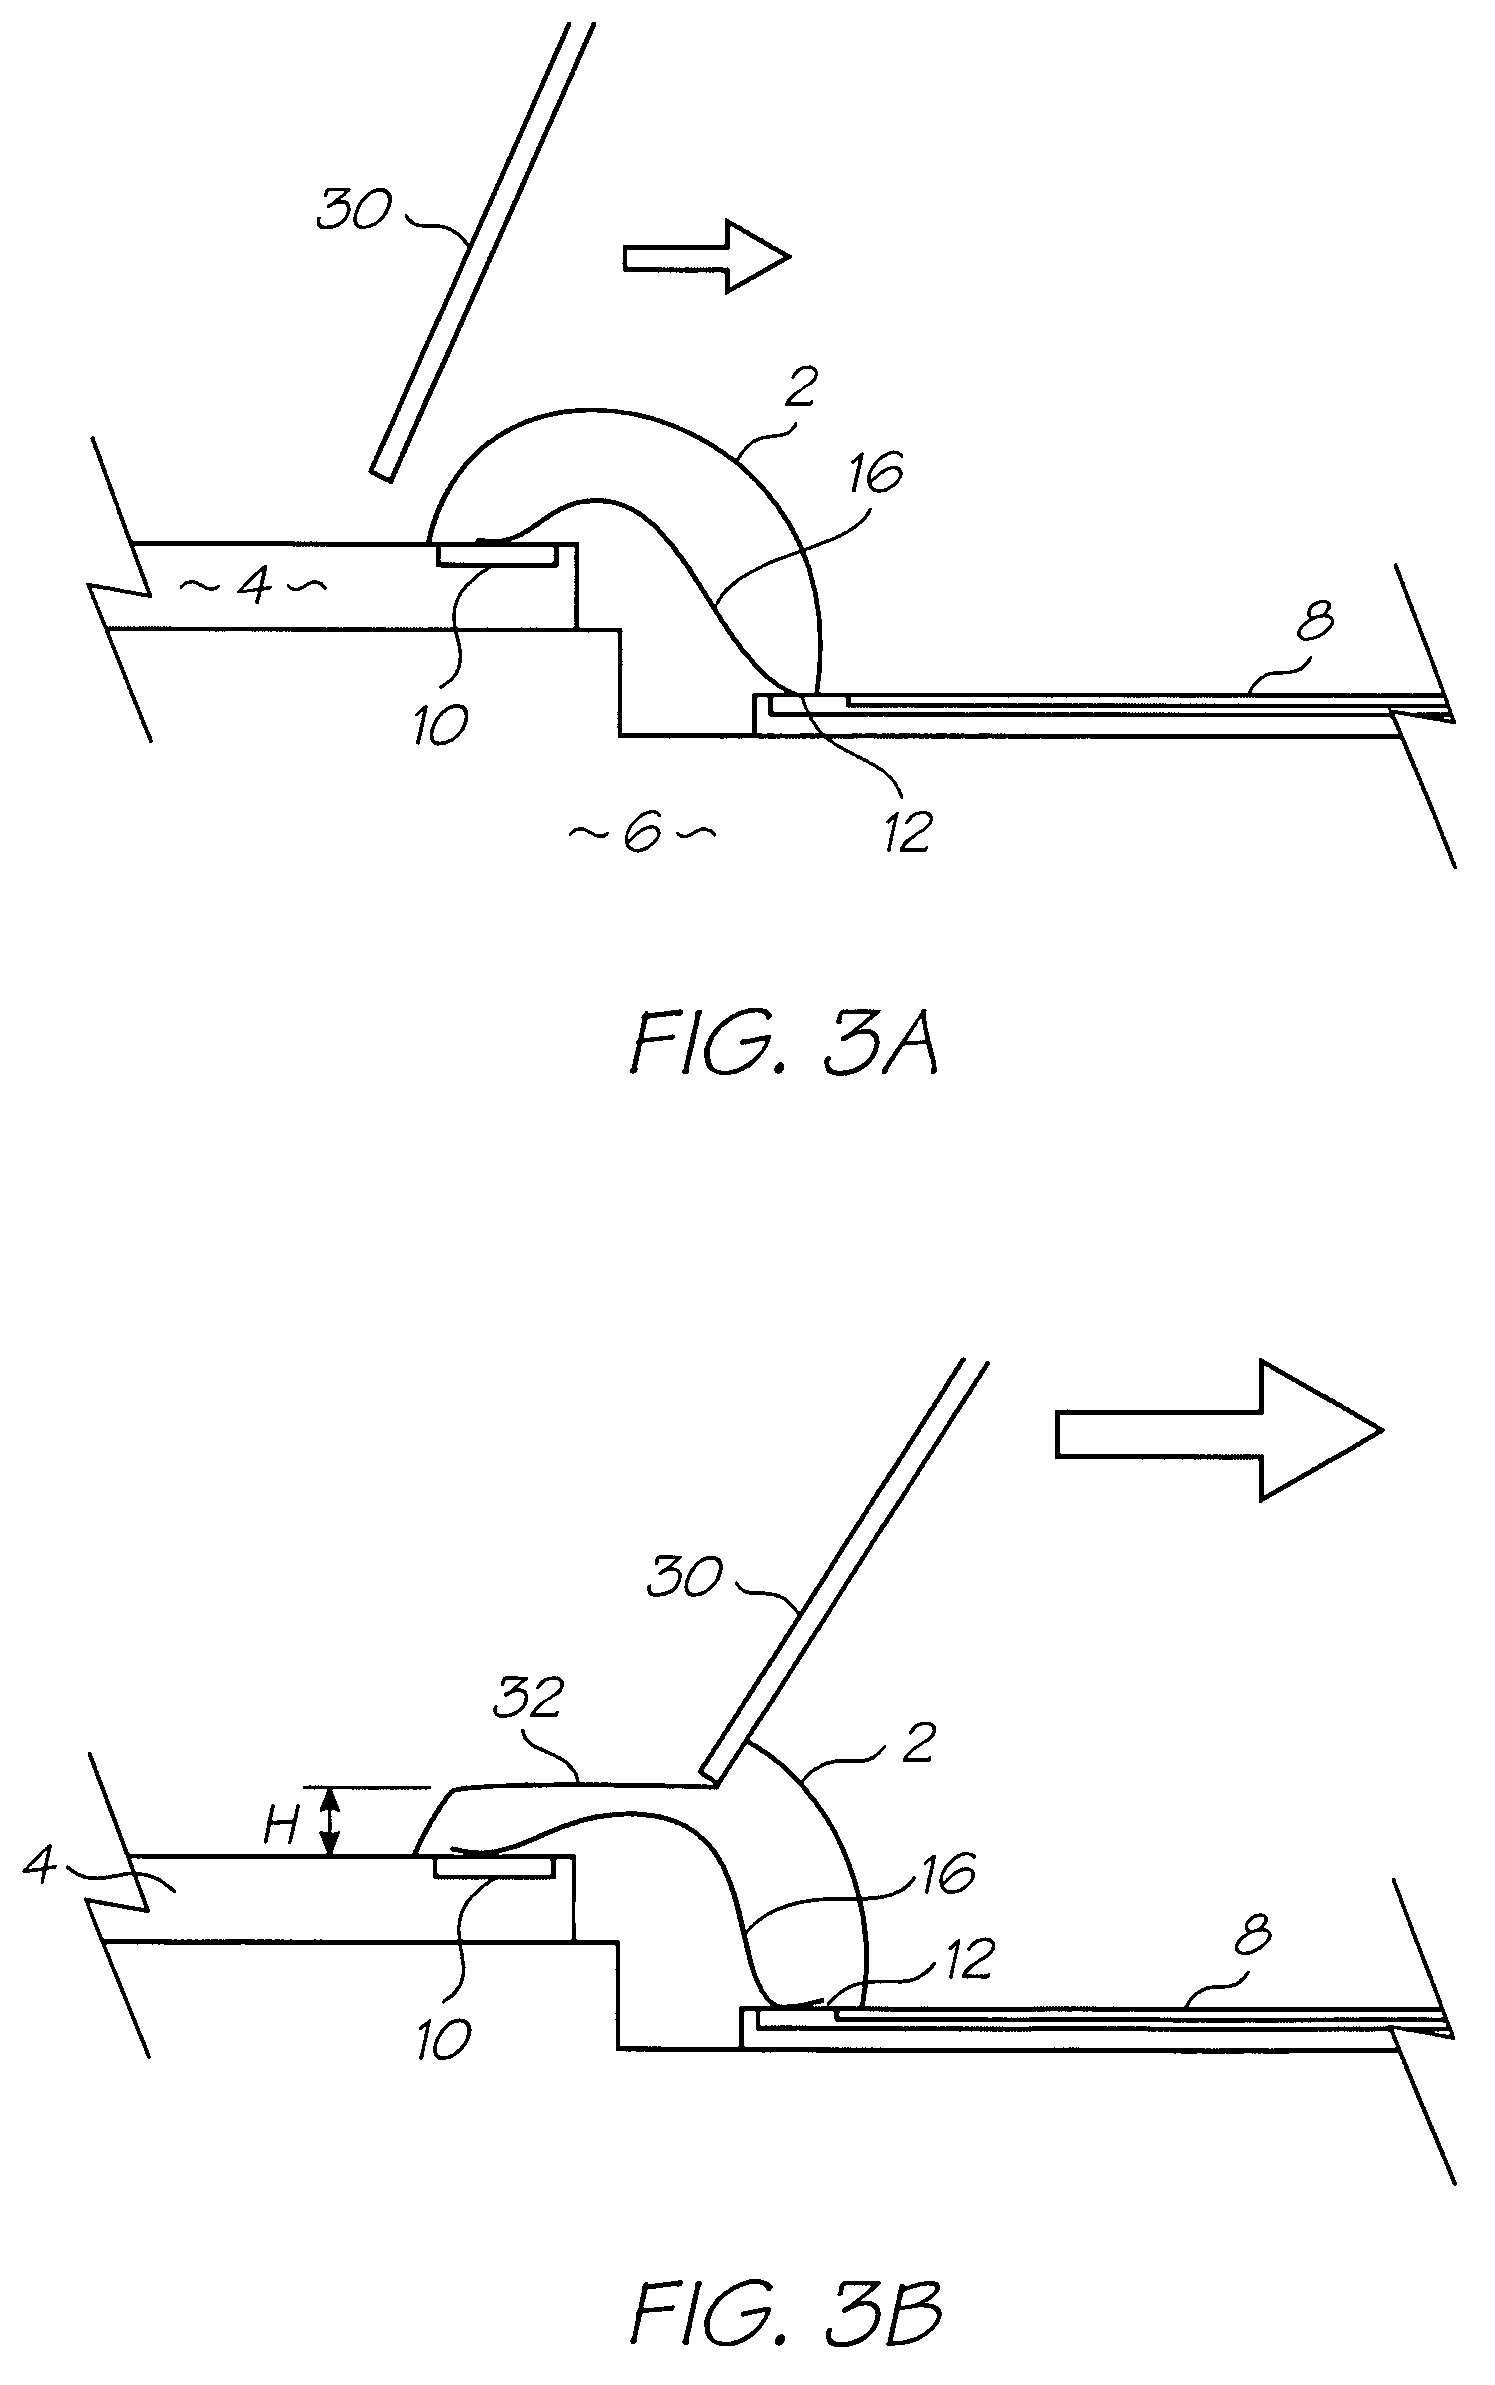 Electronic component with wire bonds in low modulus fill encapsulant